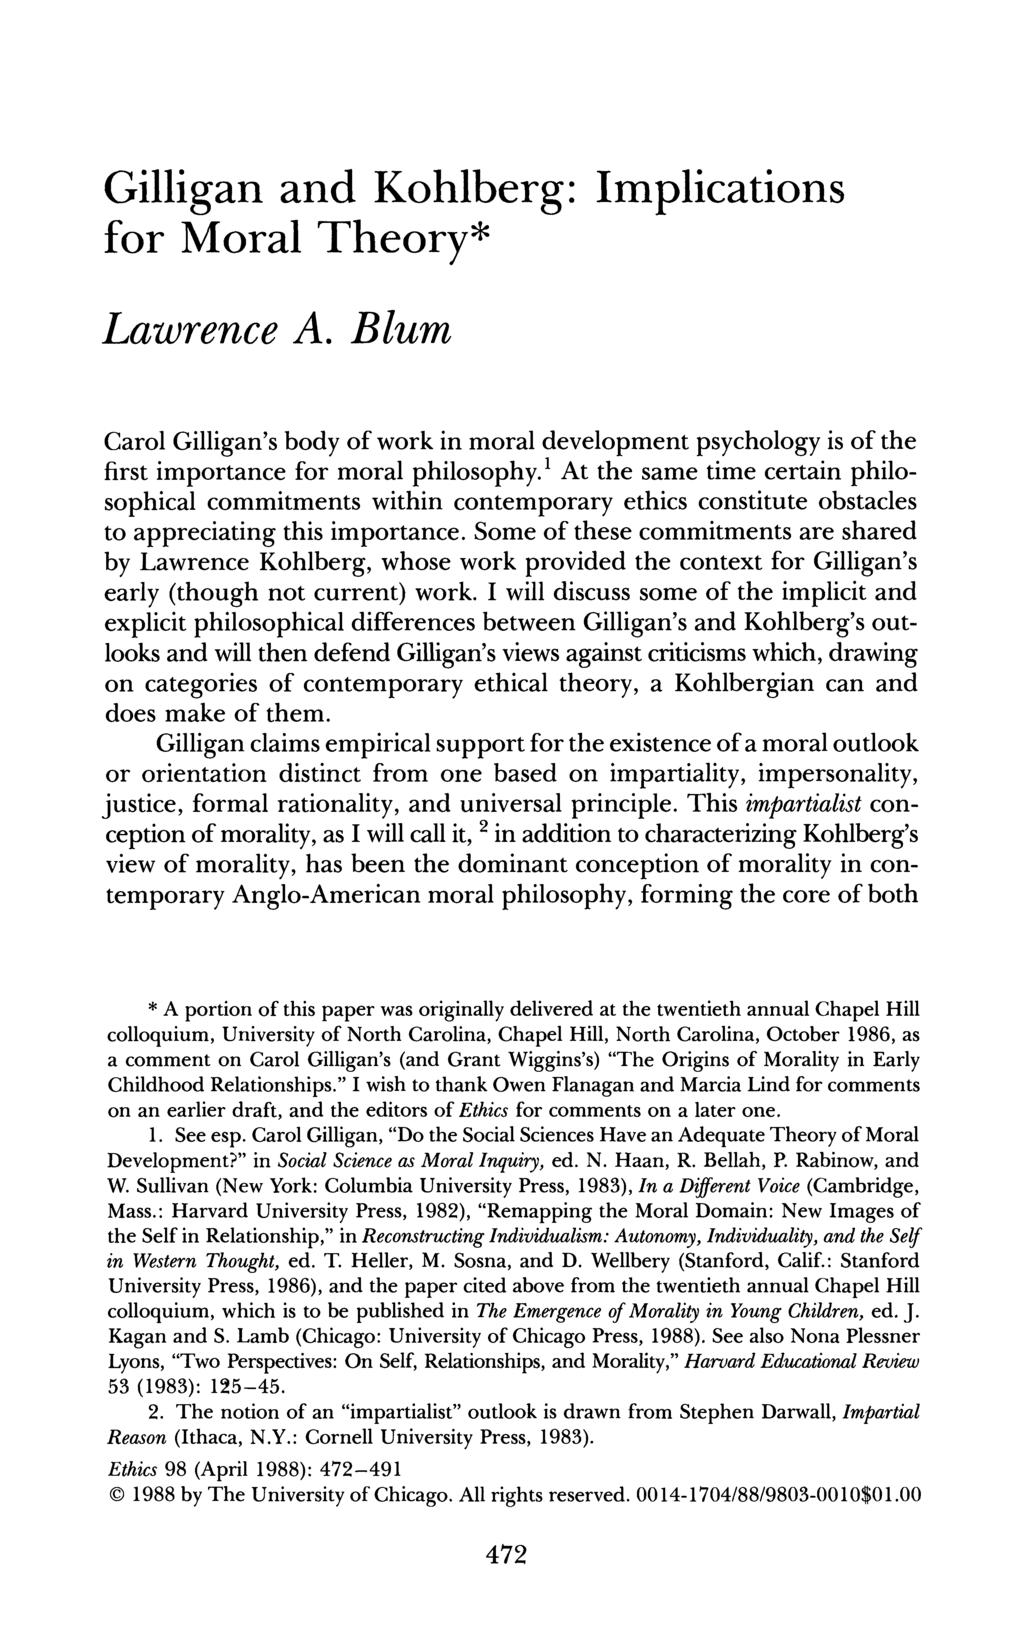 Gilligan and Kohlberg: Implications for Moral Theory* Lawrence A. Blum Carol Gilligan's body of work in moral development psychology is of the first importance for moral philosophy.